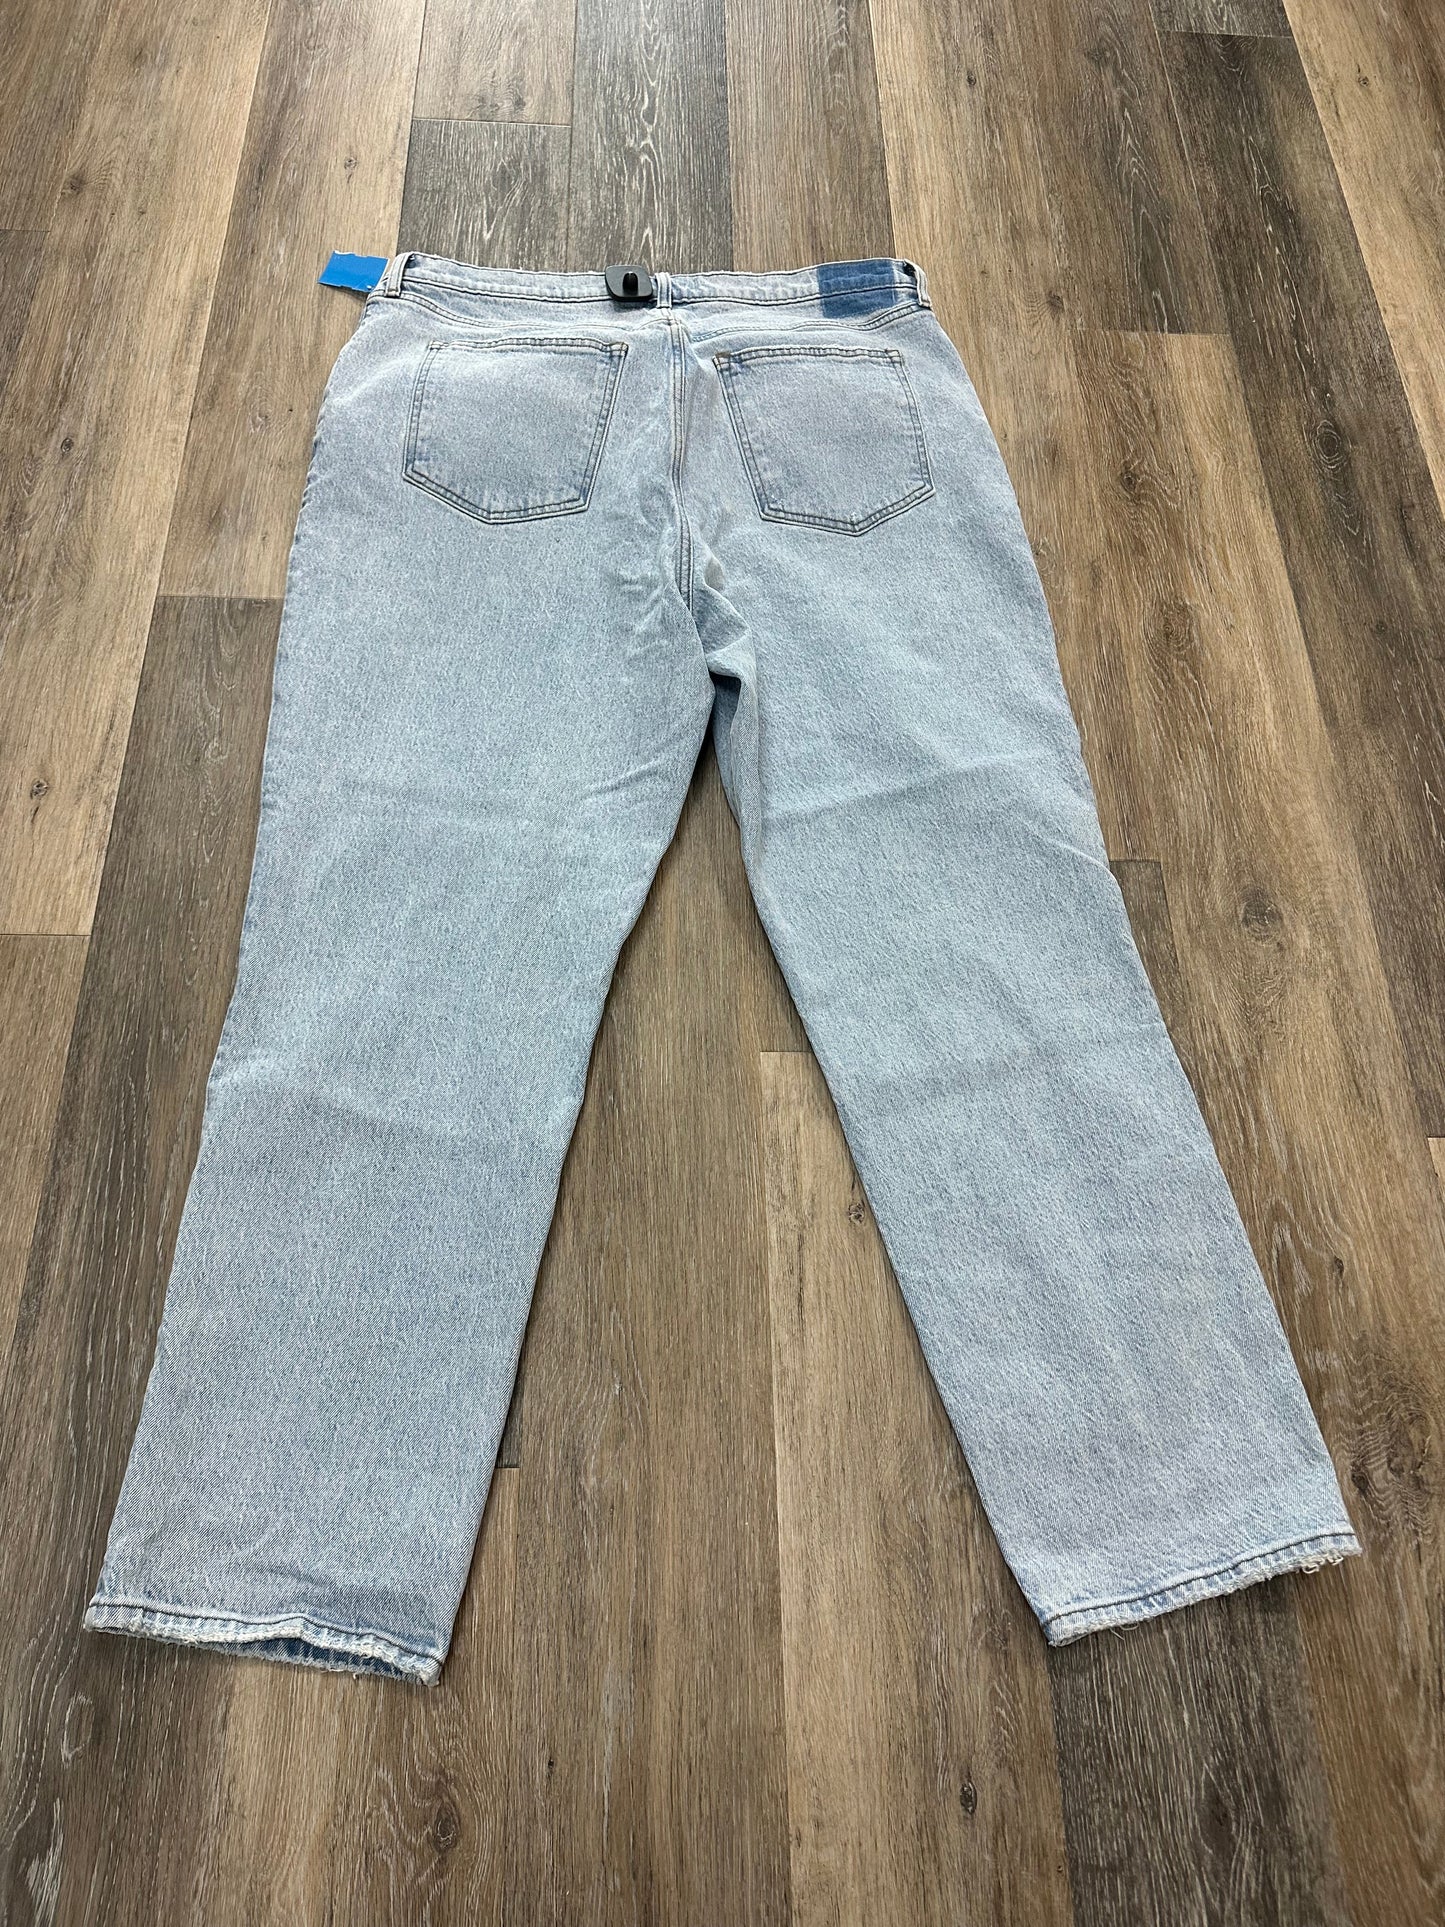 Blue Denim Jeans Straight Abercrombie And Fitch, Size 18